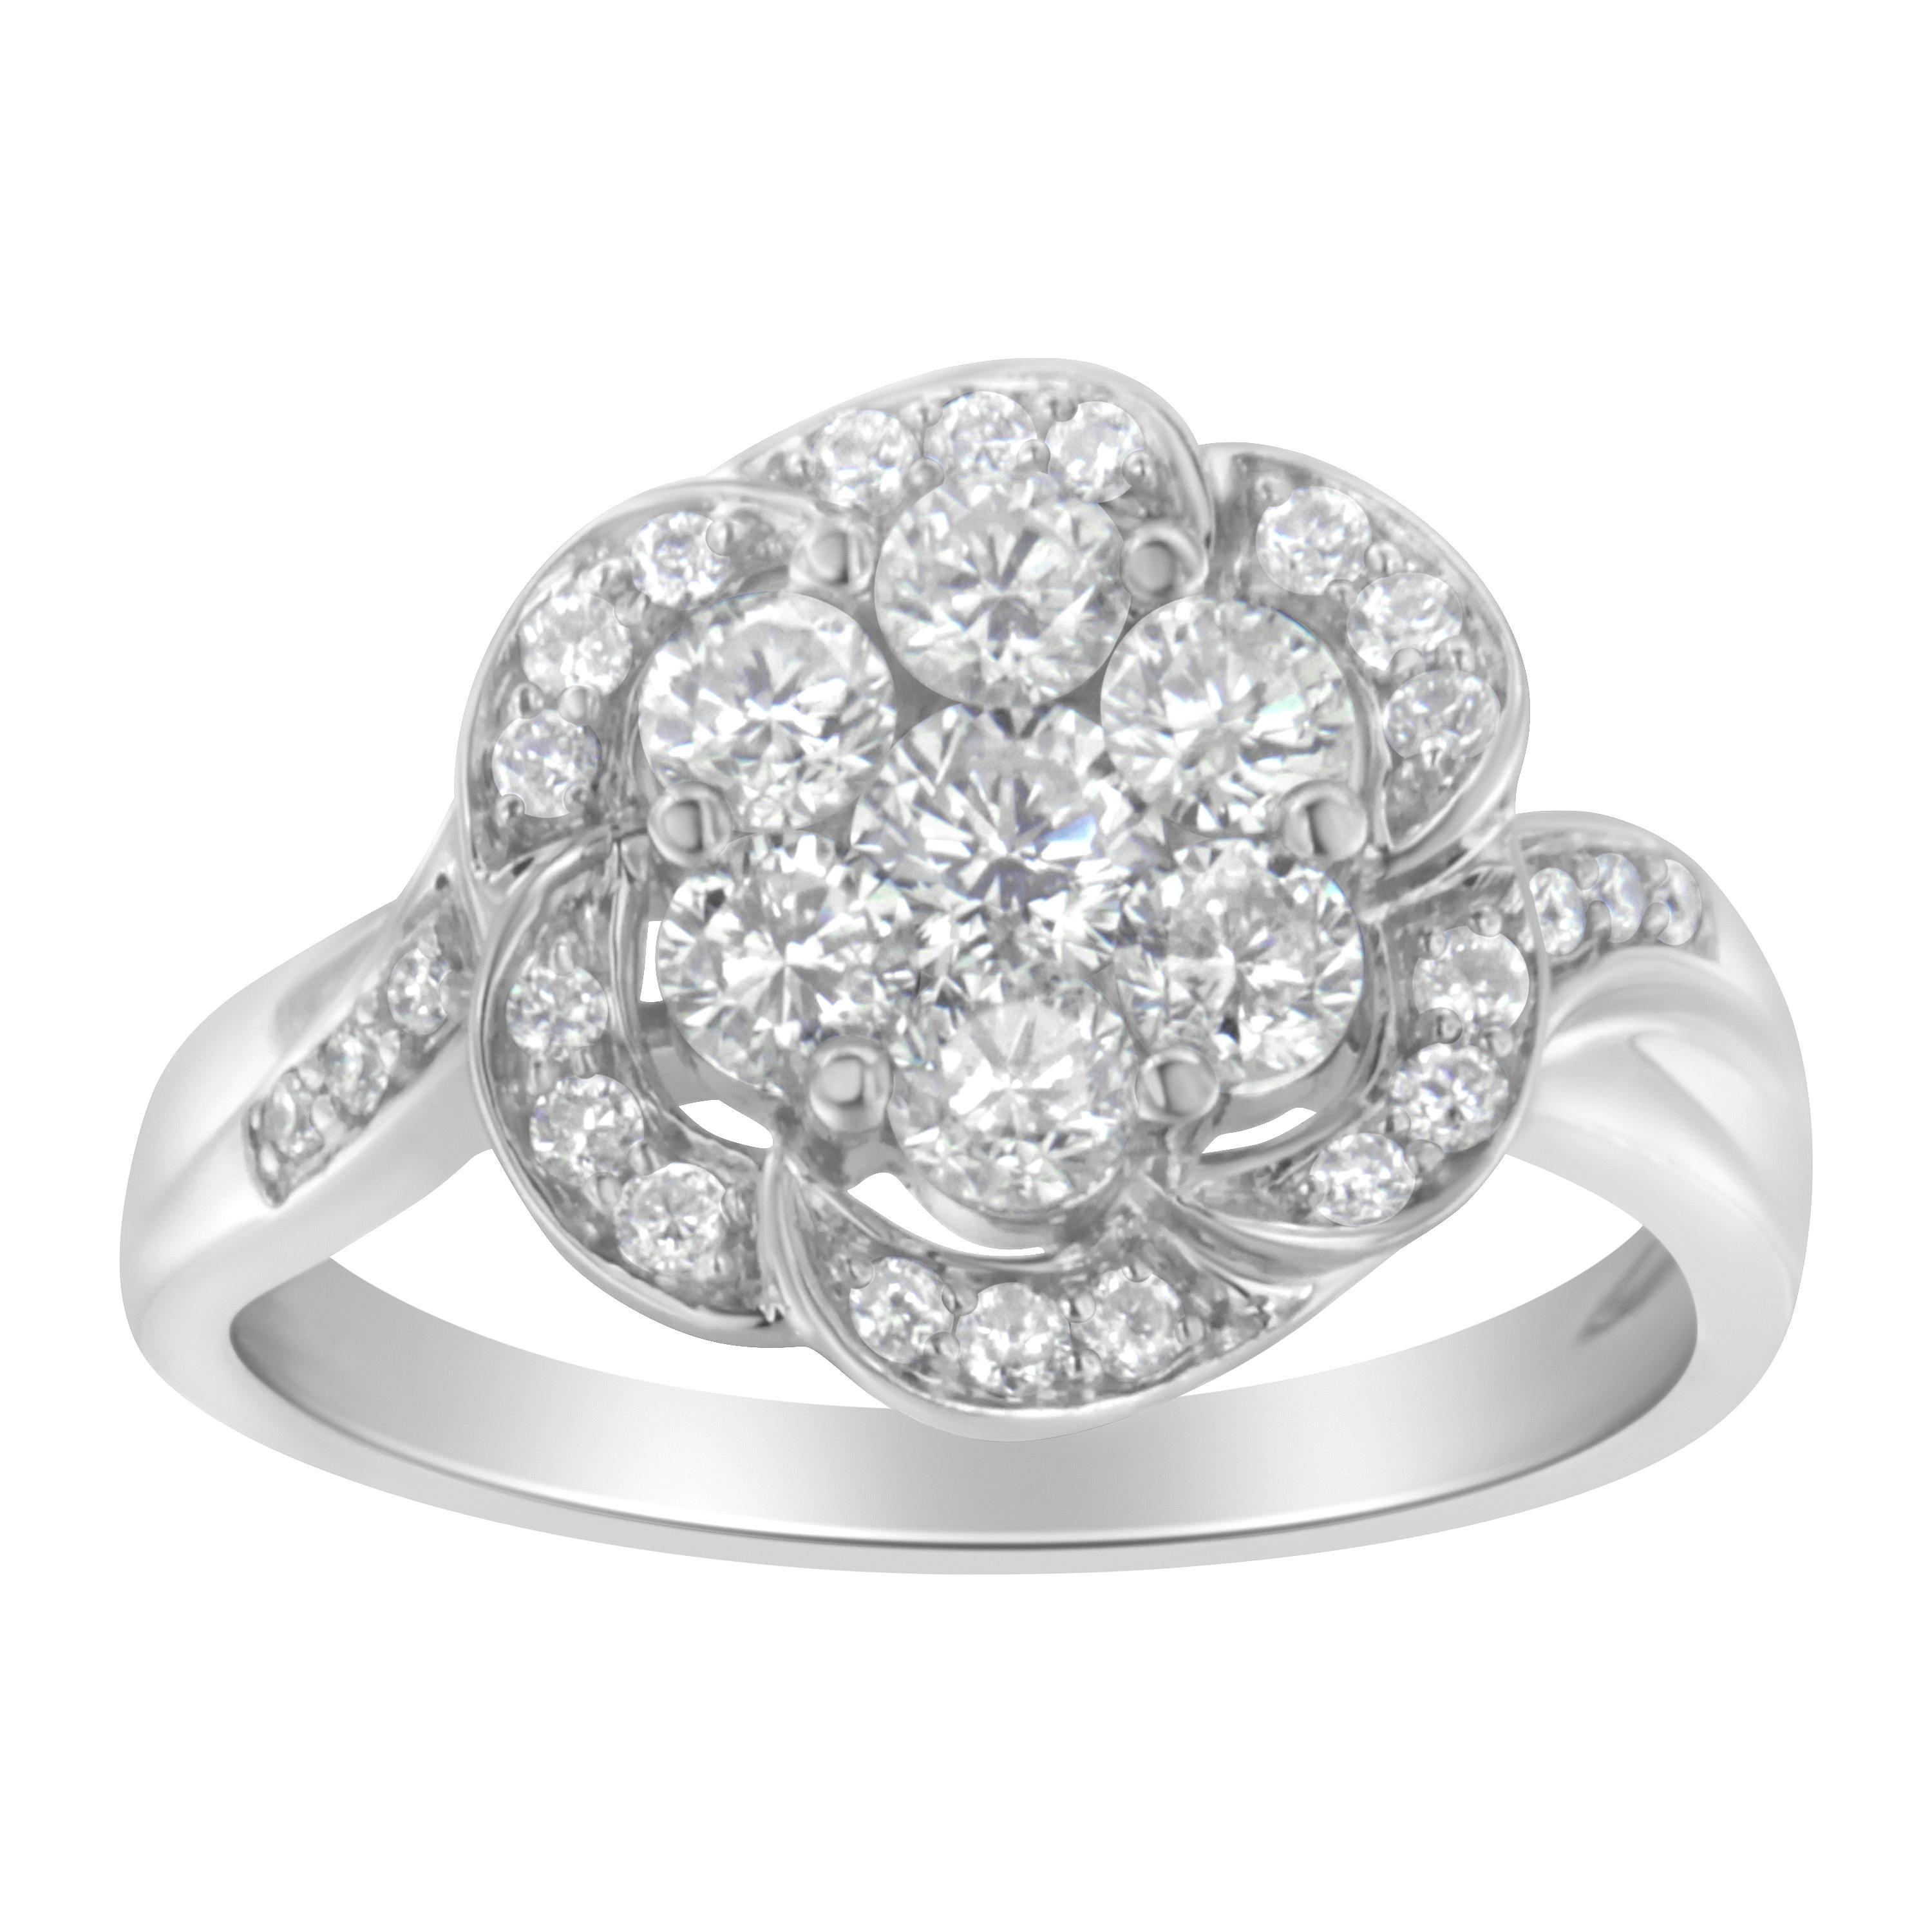 For Sale:  14K White Gold 1.00 Carat Floral Cluster Diamond Ring 5